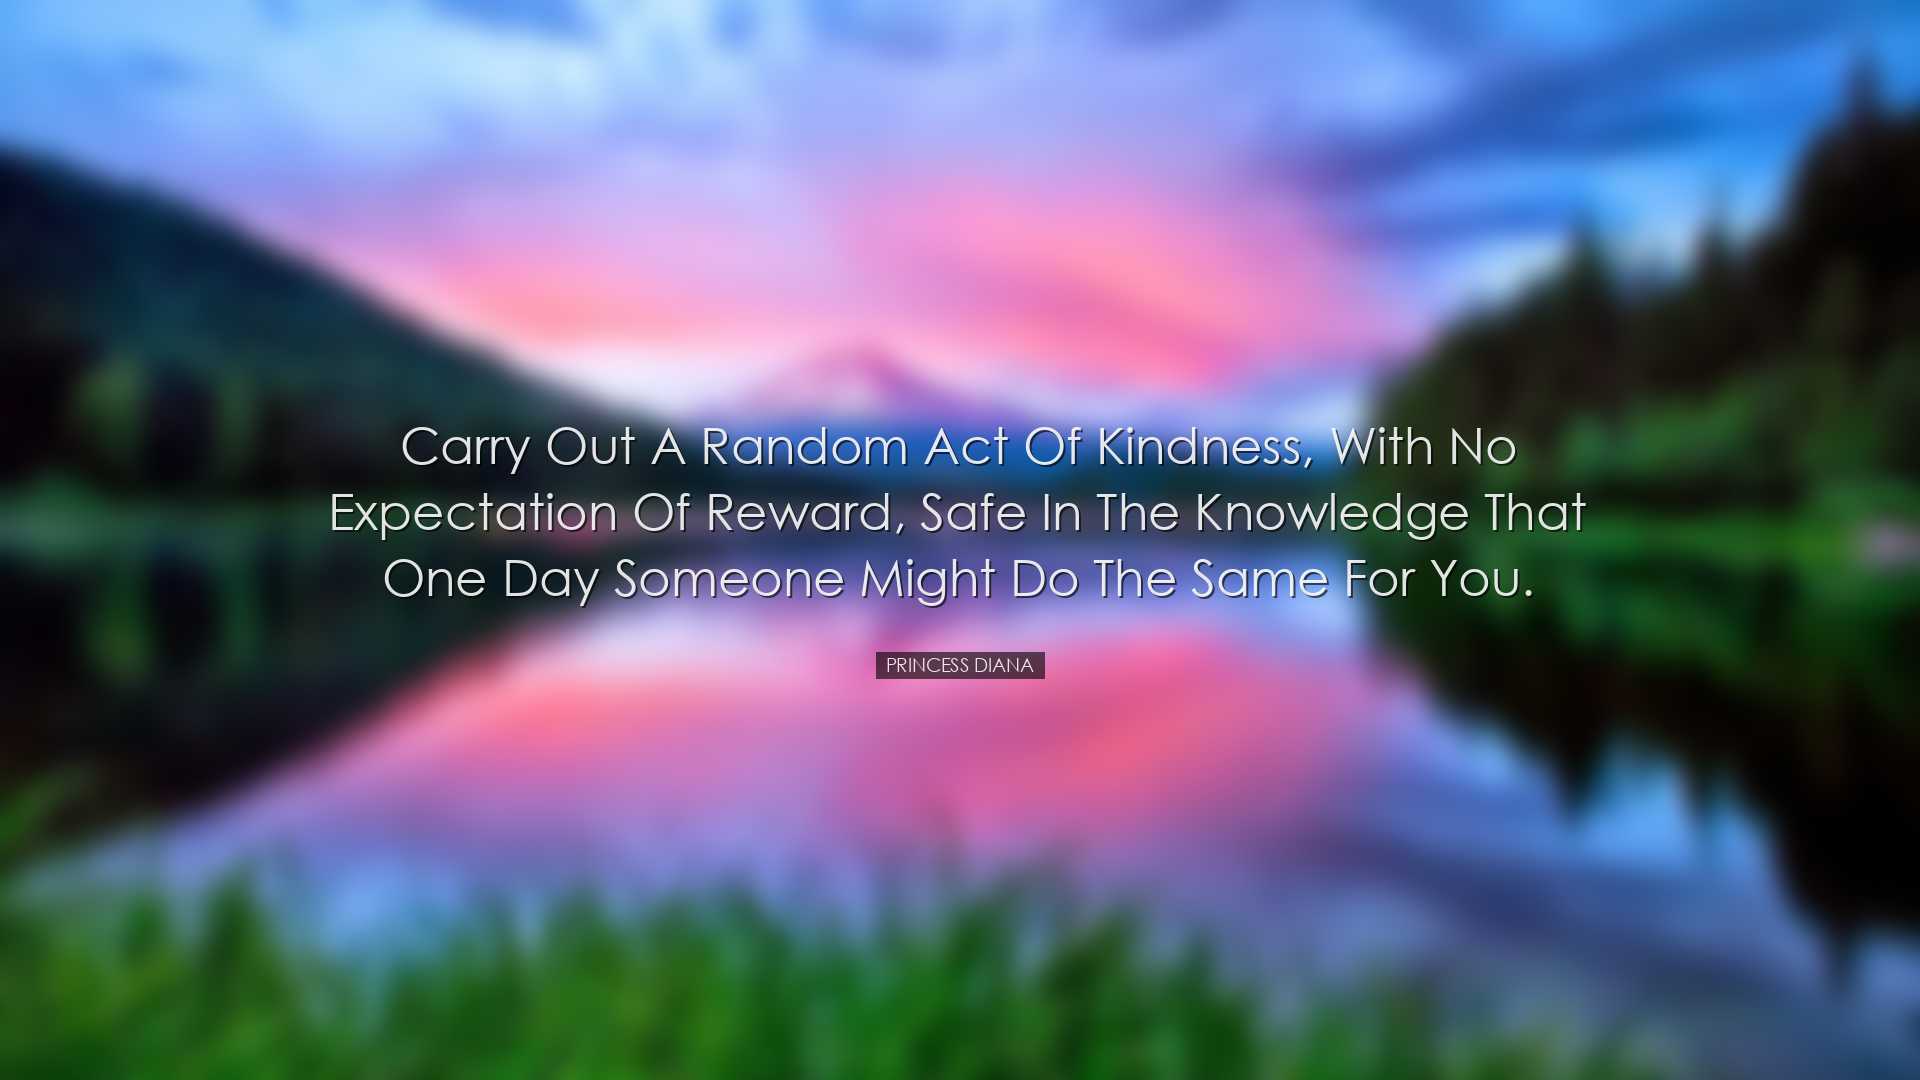 Carry out a random act of kindness, with no expectation of reward,